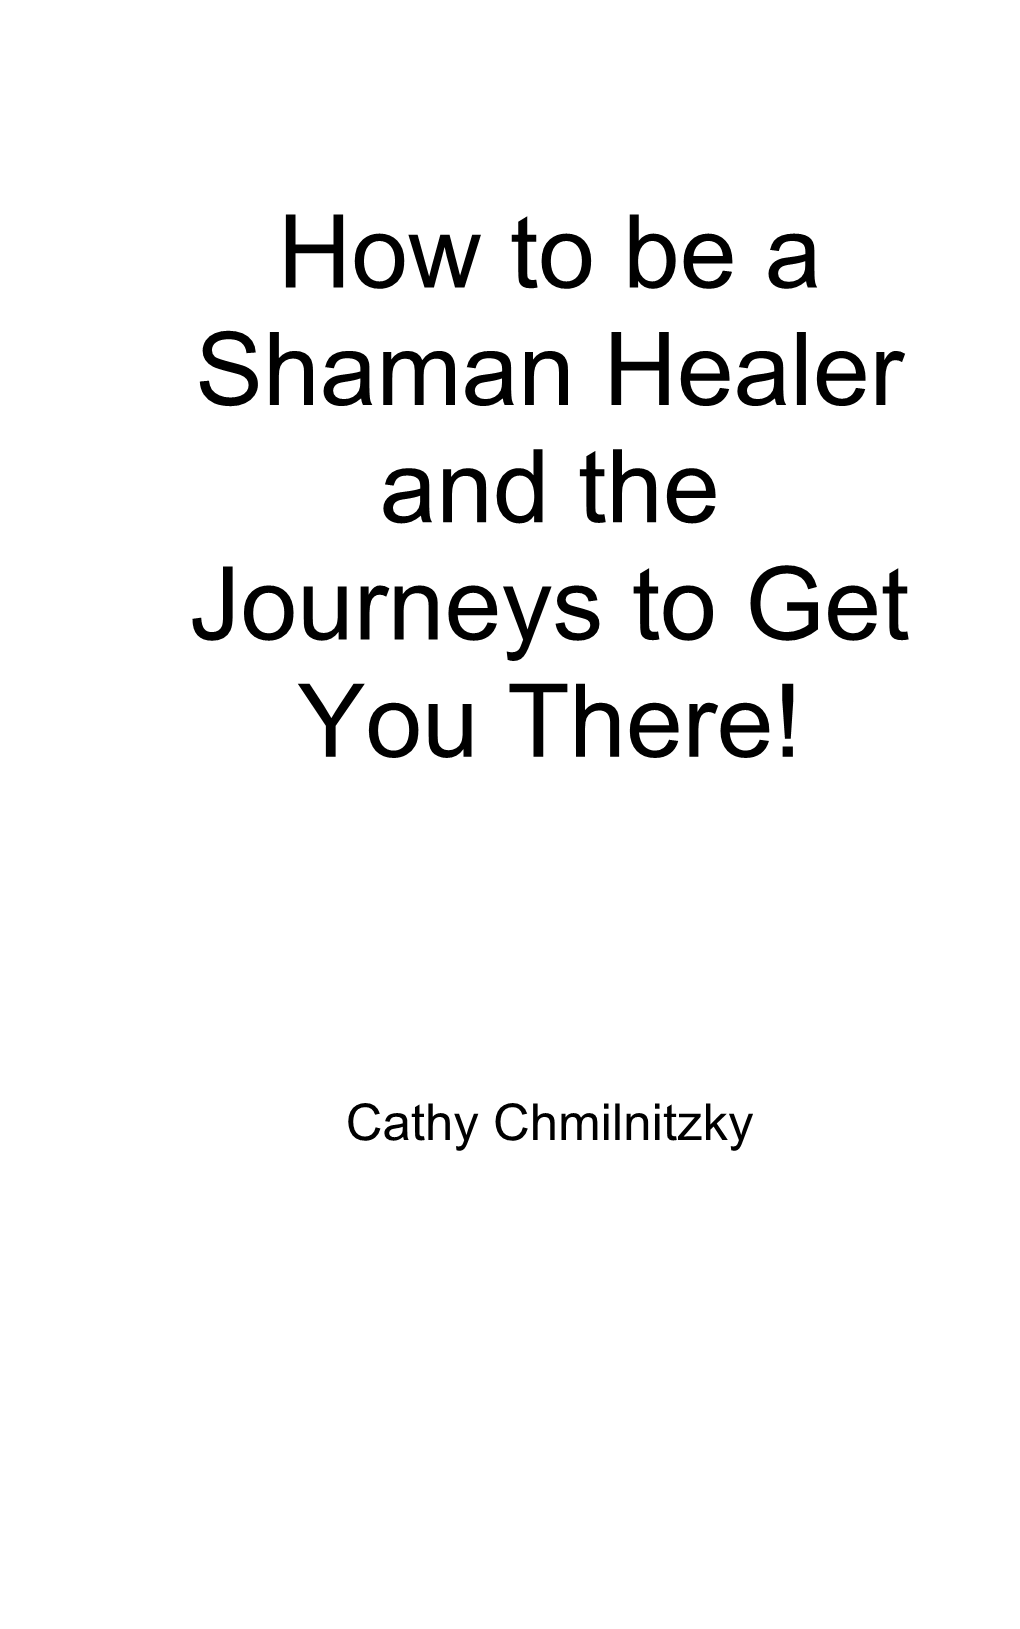 How to Be a Shaman Healer and the Journeys to Get You There